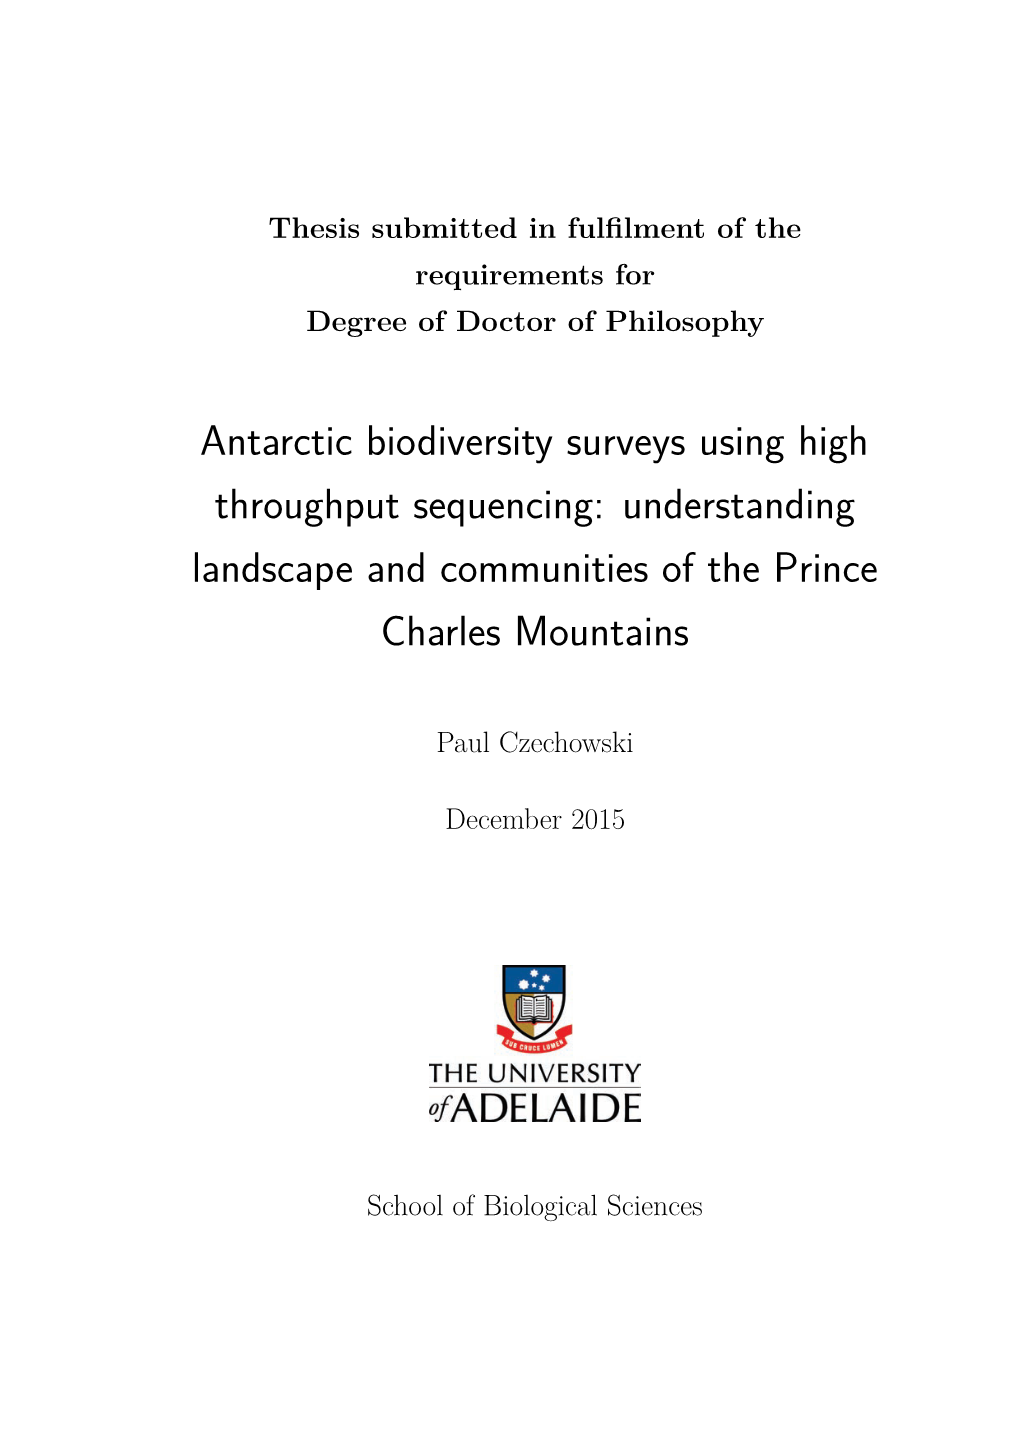 Antarctic Biodiversity Surveys Using High Throughput Sequencing: Understanding Landscape and Communities of the Prince Charles Mountains